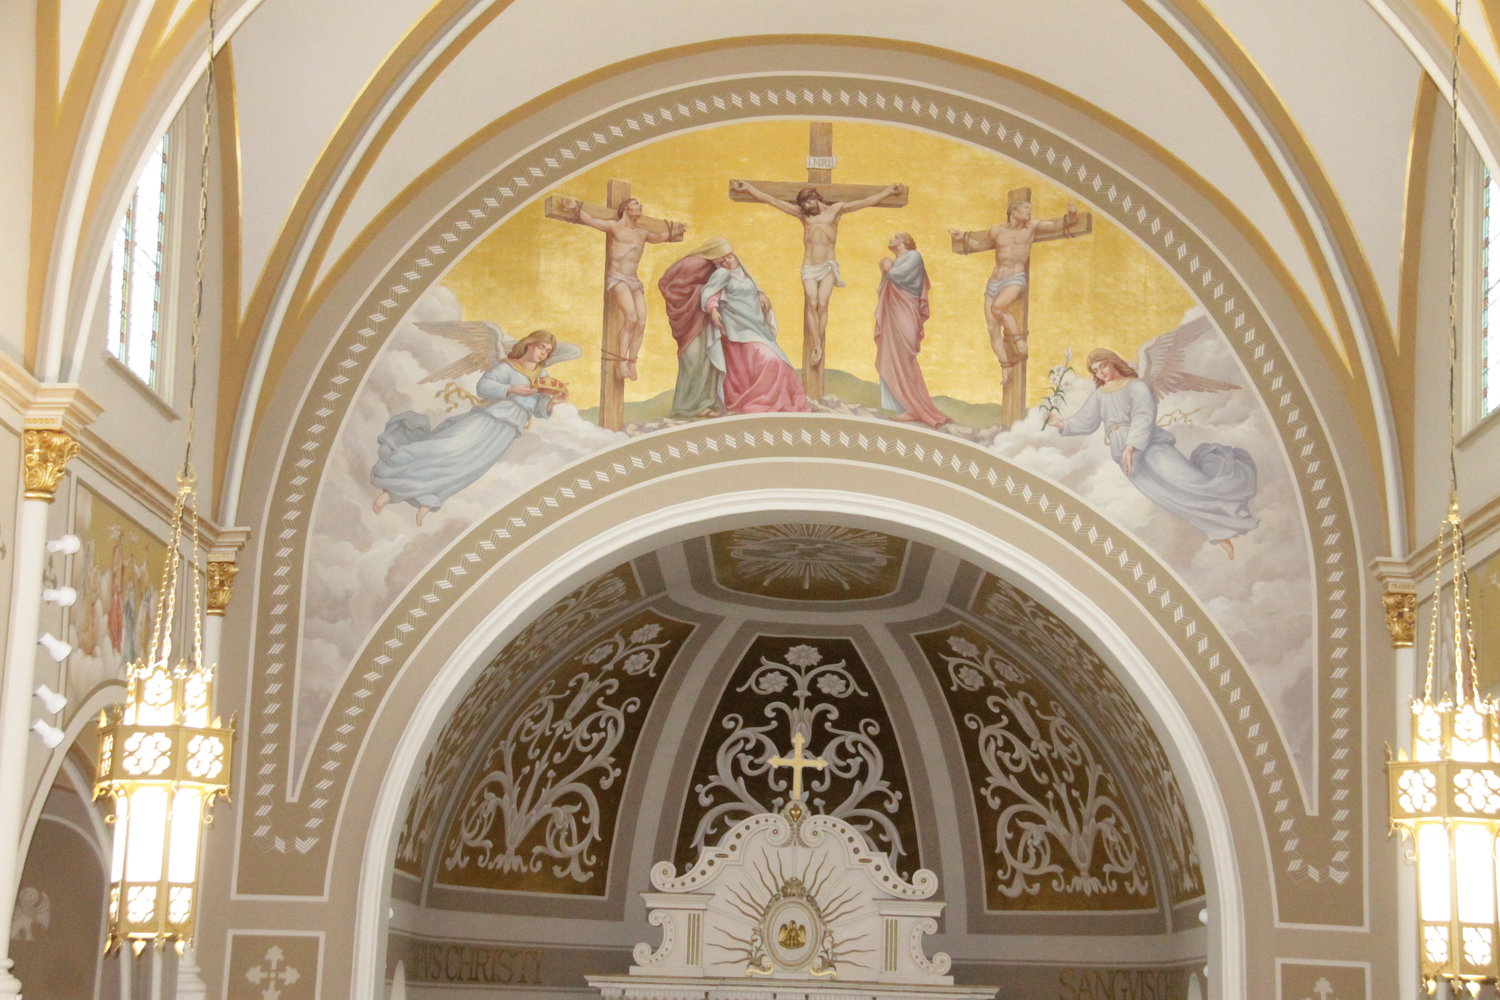 This nearly 25-foot-wide, gilded mural depicting the Crucifixion adorns the chancel arch above the altar in St. Joseph Church in Westphalia. It is part of a nearly completed, massive renovation of the church.